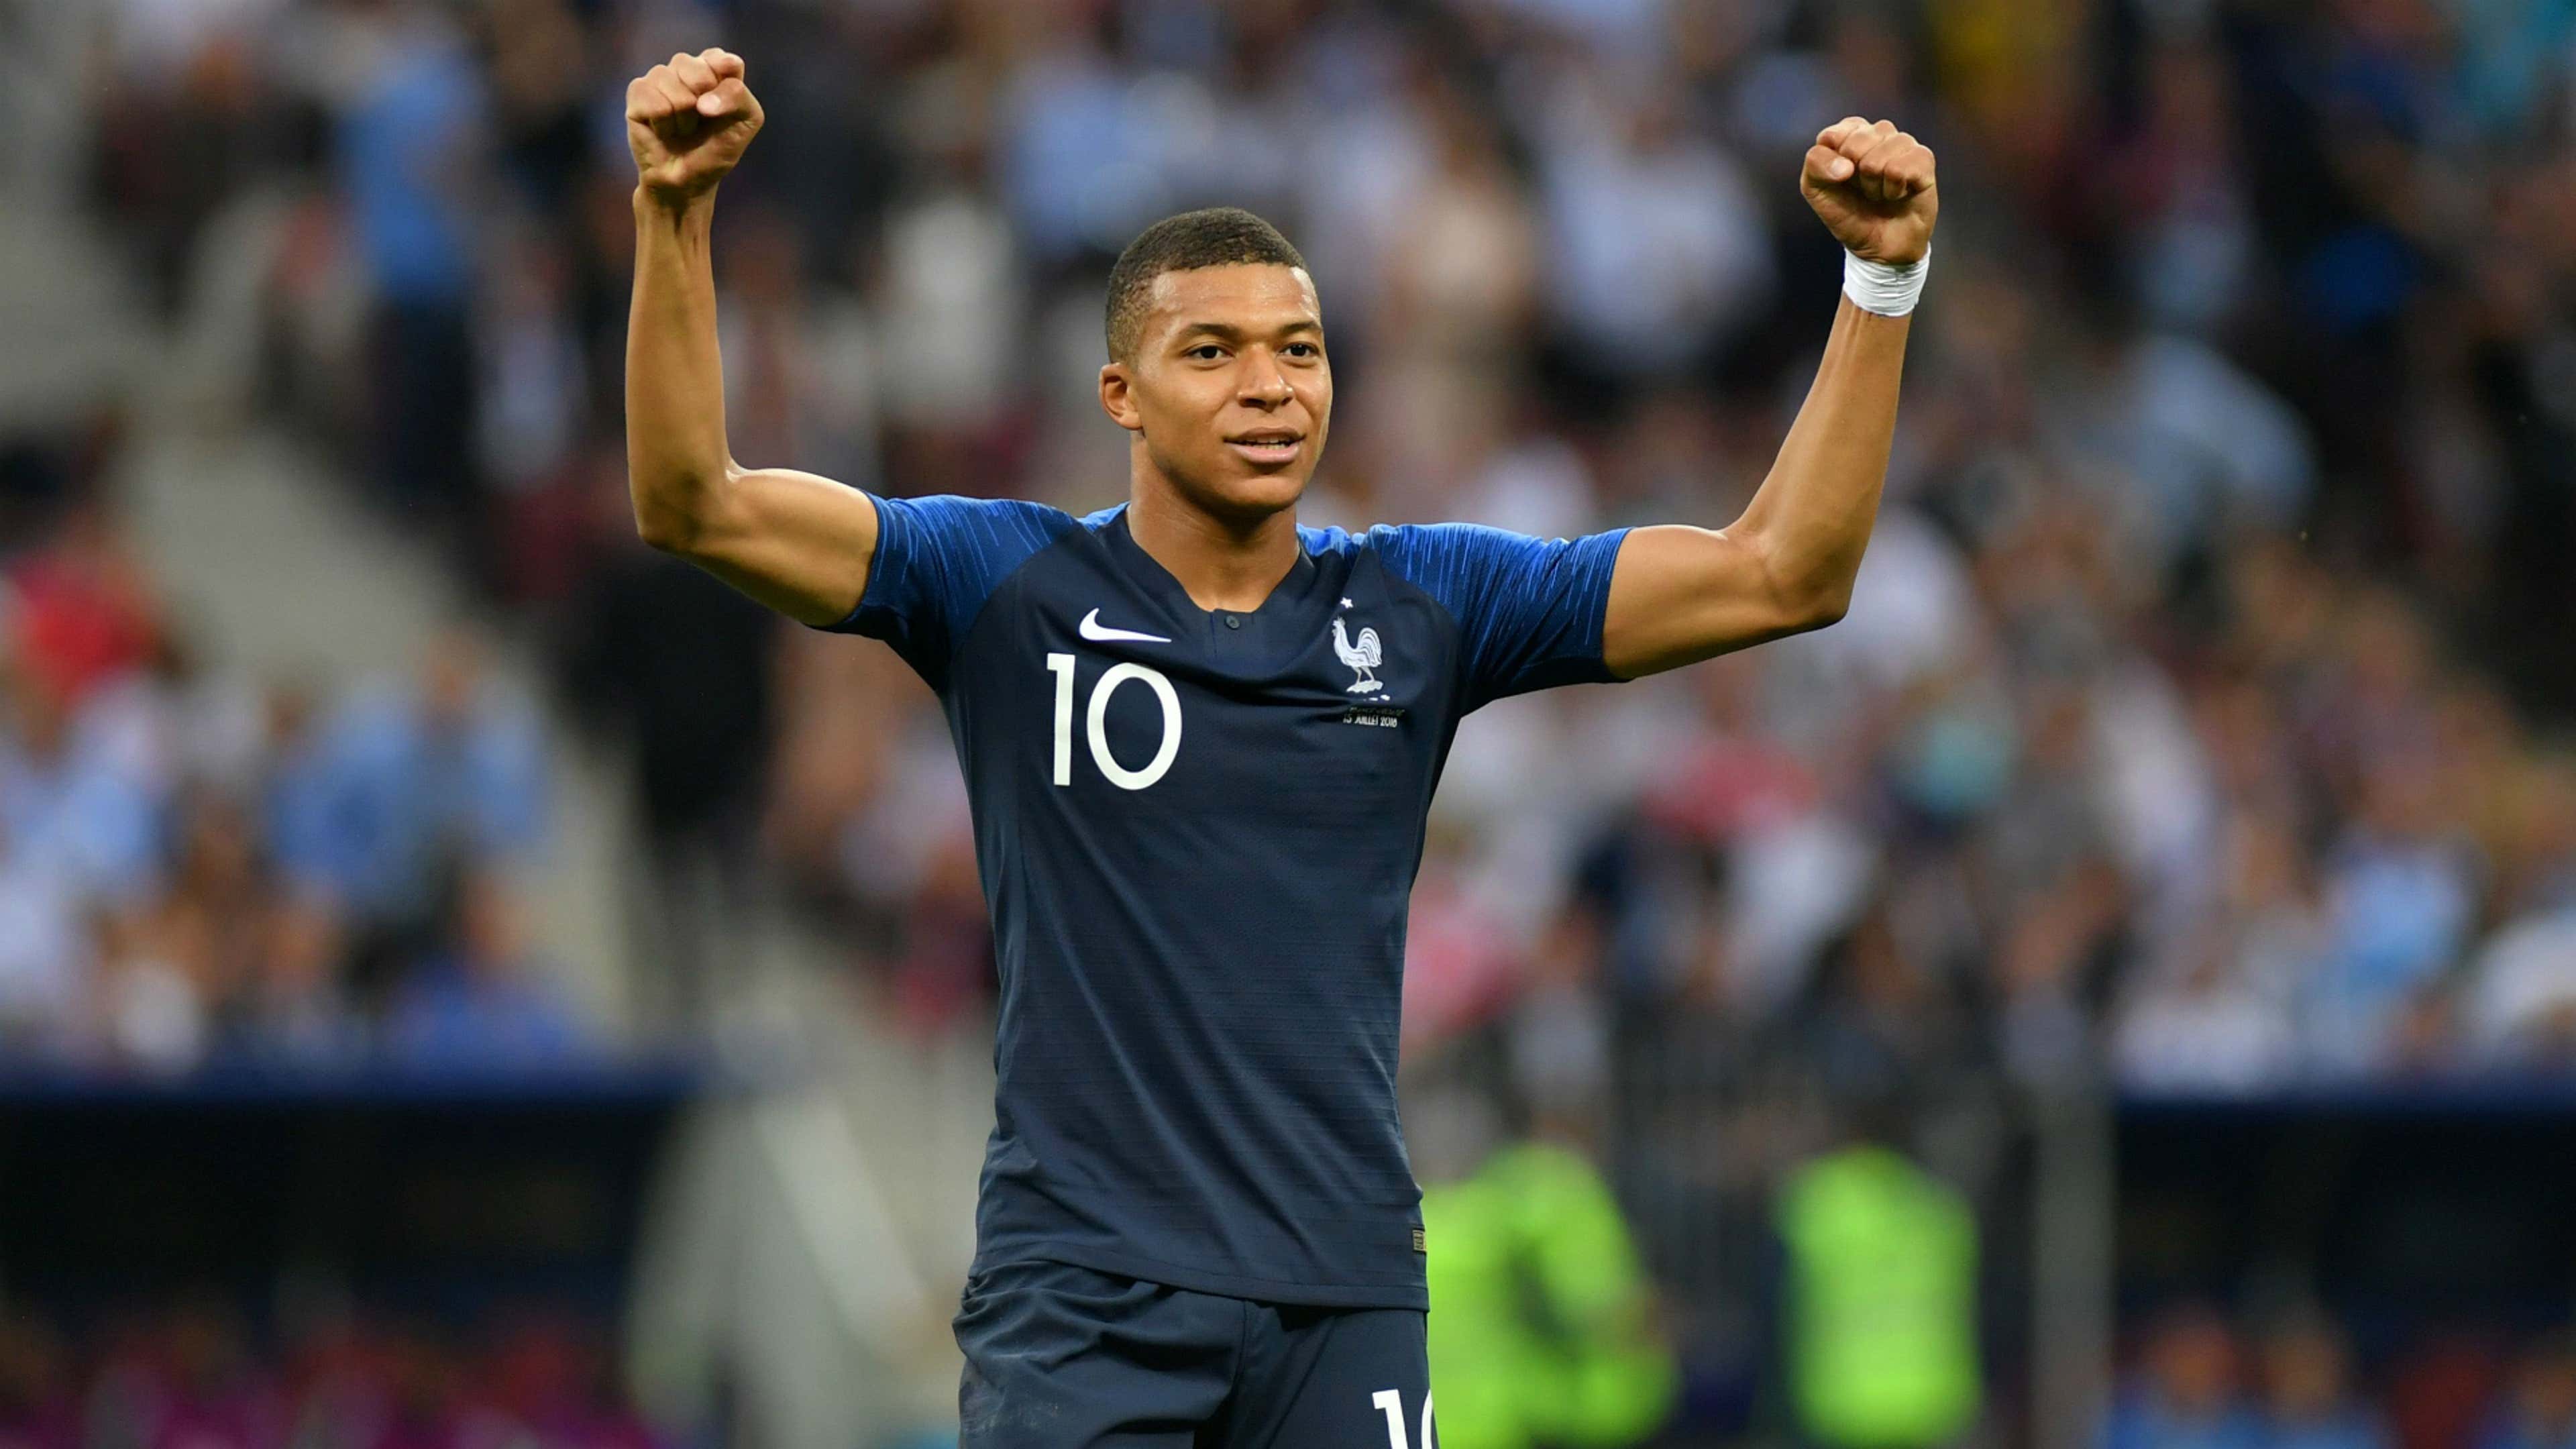 Mbappe, Kieran Trippier in 2018 World Cup Team of the Tournament now